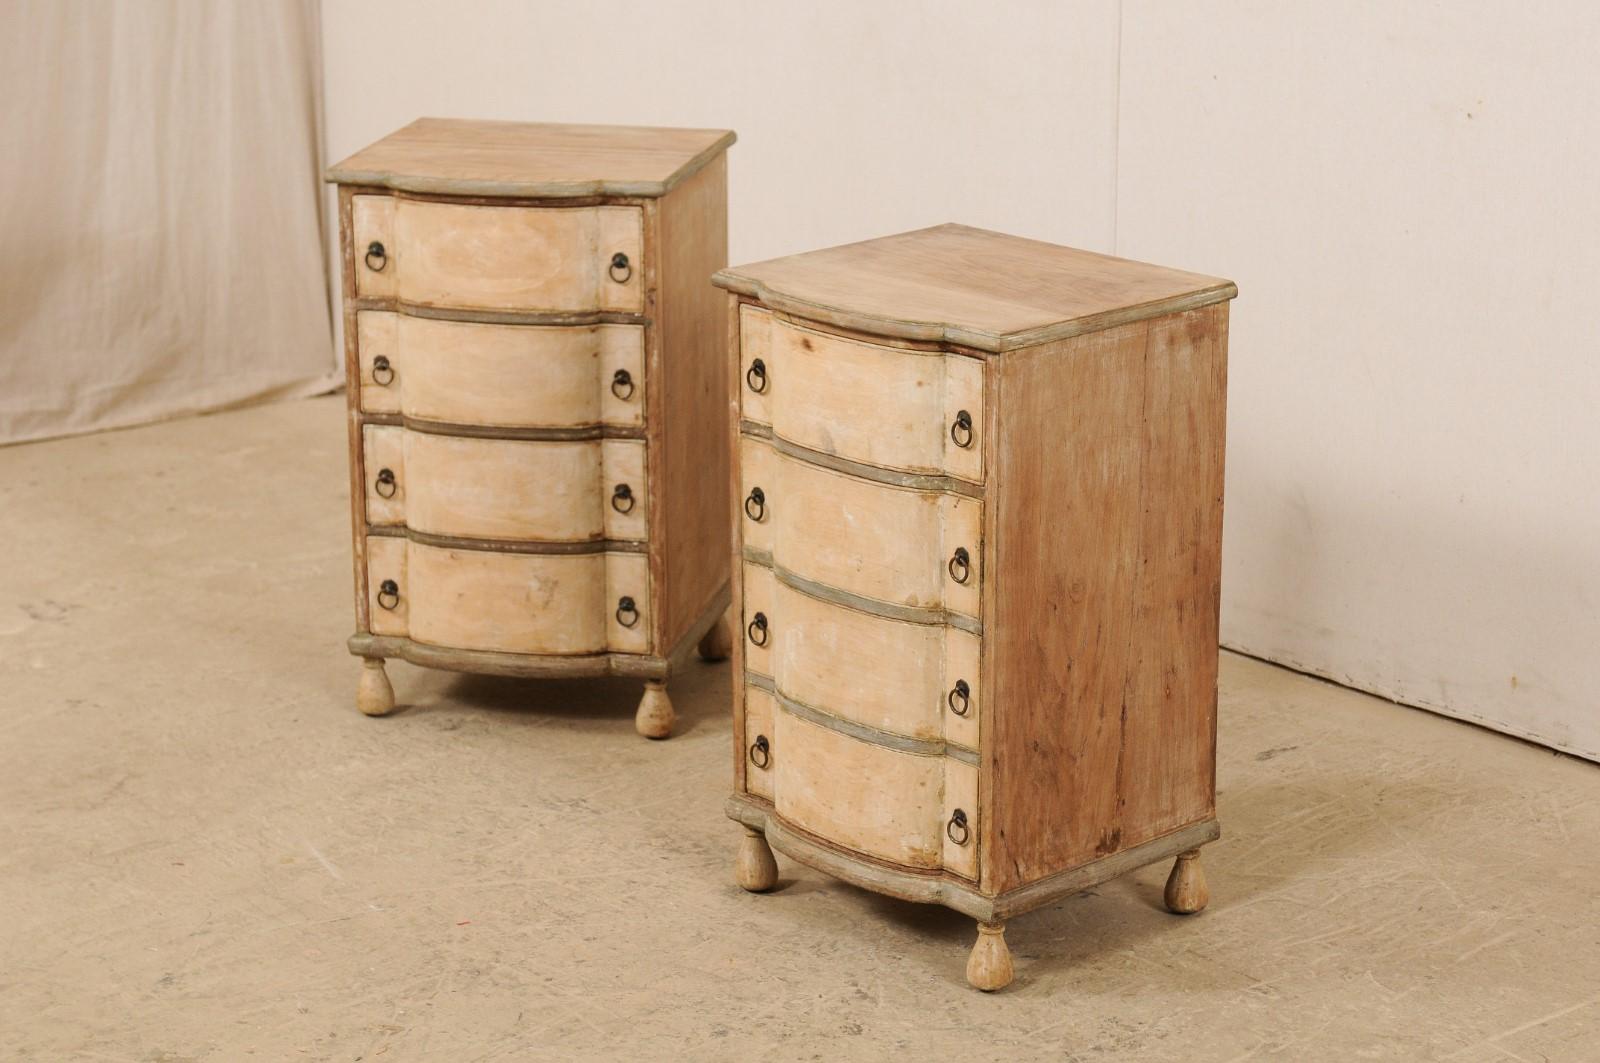 20th Century Italian Petite Comodini '1 with Drawers and 1 a Cabinet with Faux Drawers', Pair